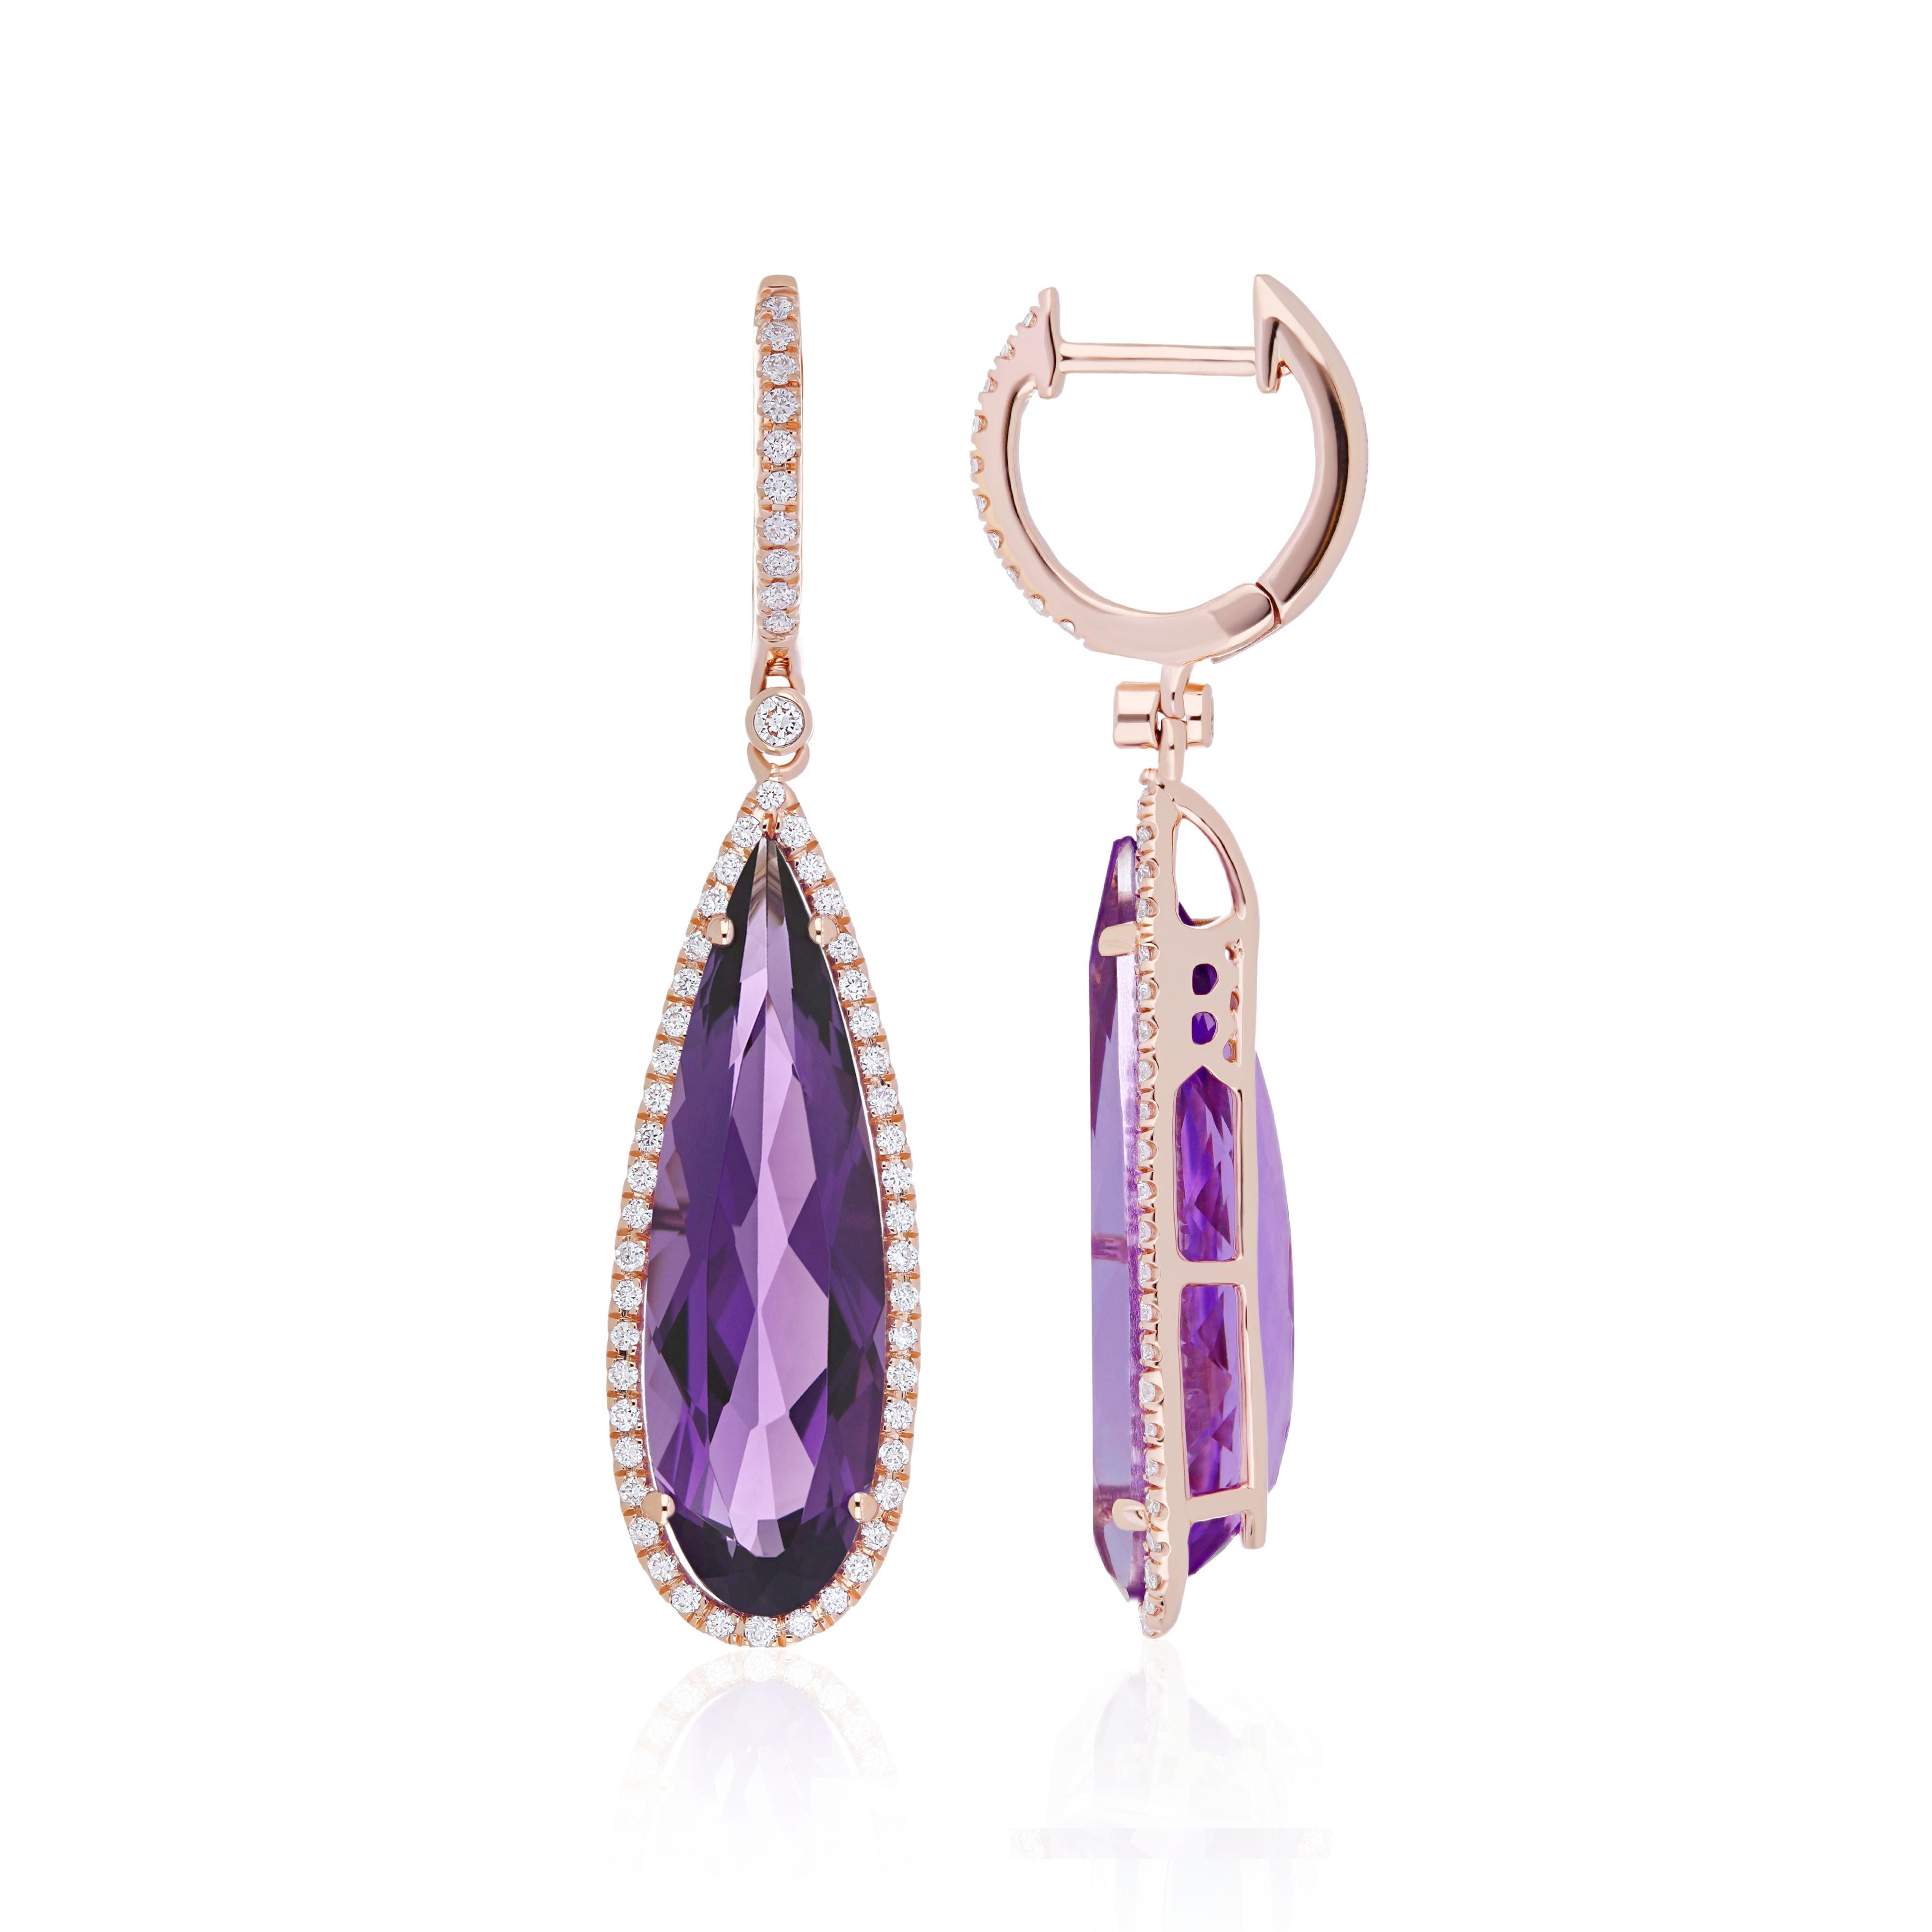 Elegant and Exquisitely Detailed Rose Gold Earring set with Elongated Pear Shape Amethyst weighing approx. 10.4 Cts and with micro prove set Diamonds weighing approx. 0.47Cts Beautifully Hand Crafted in 
14 karat, Rose Gold Earring.

Product